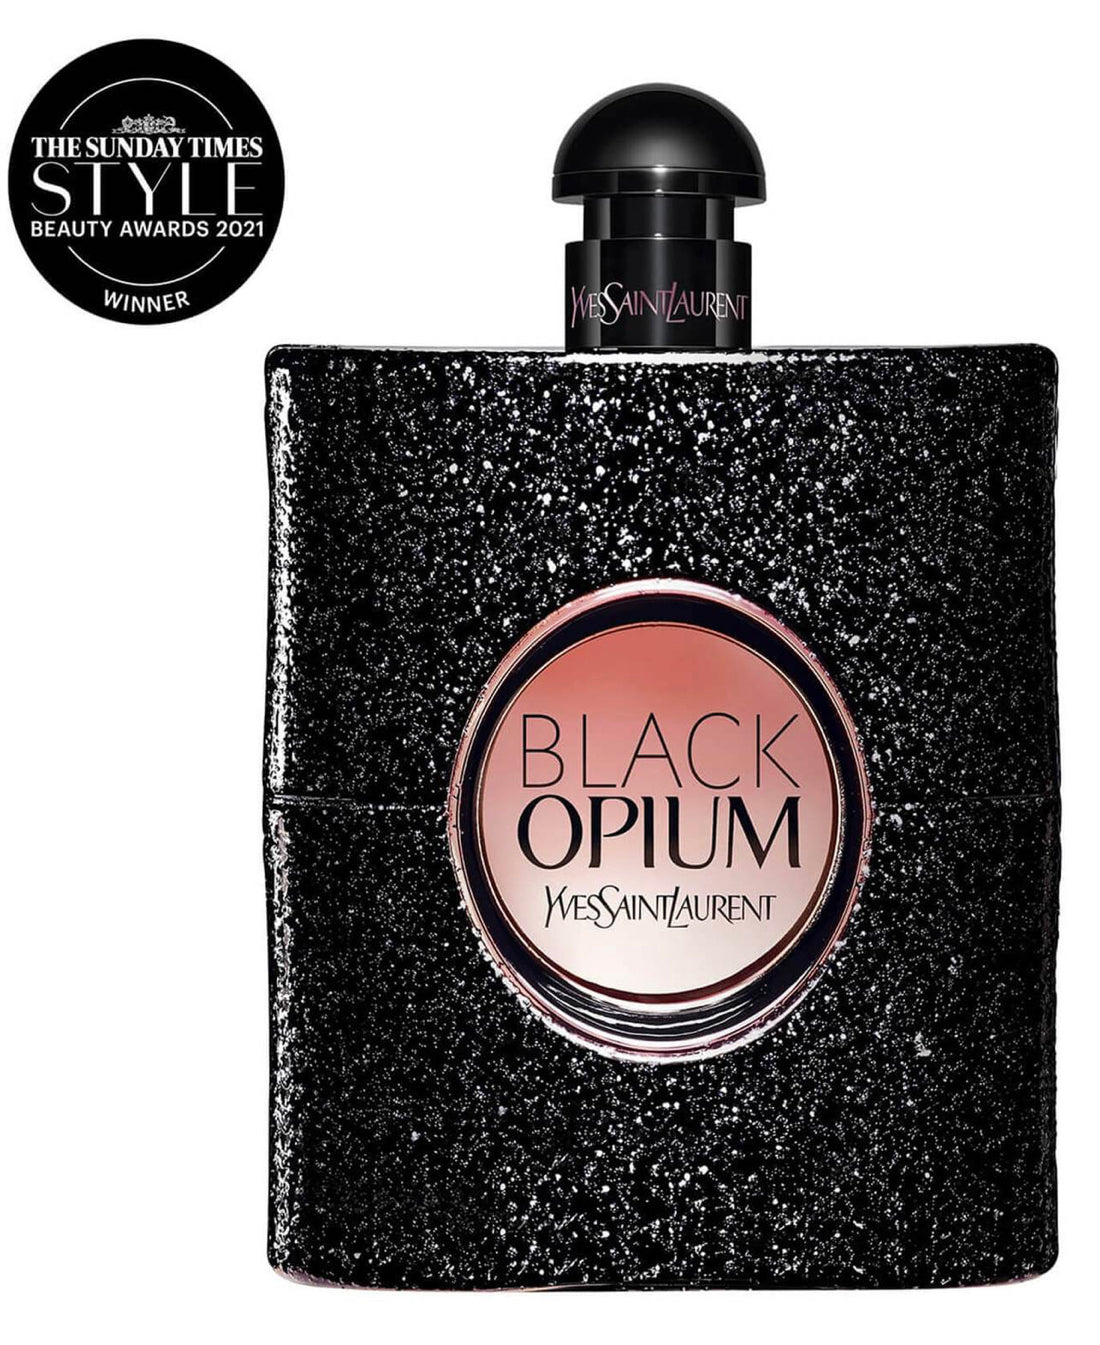 Shop for samples of Black Opium Le Parfum (Parfum) by Yves Saint Laurent  for women rebottled and repacked by